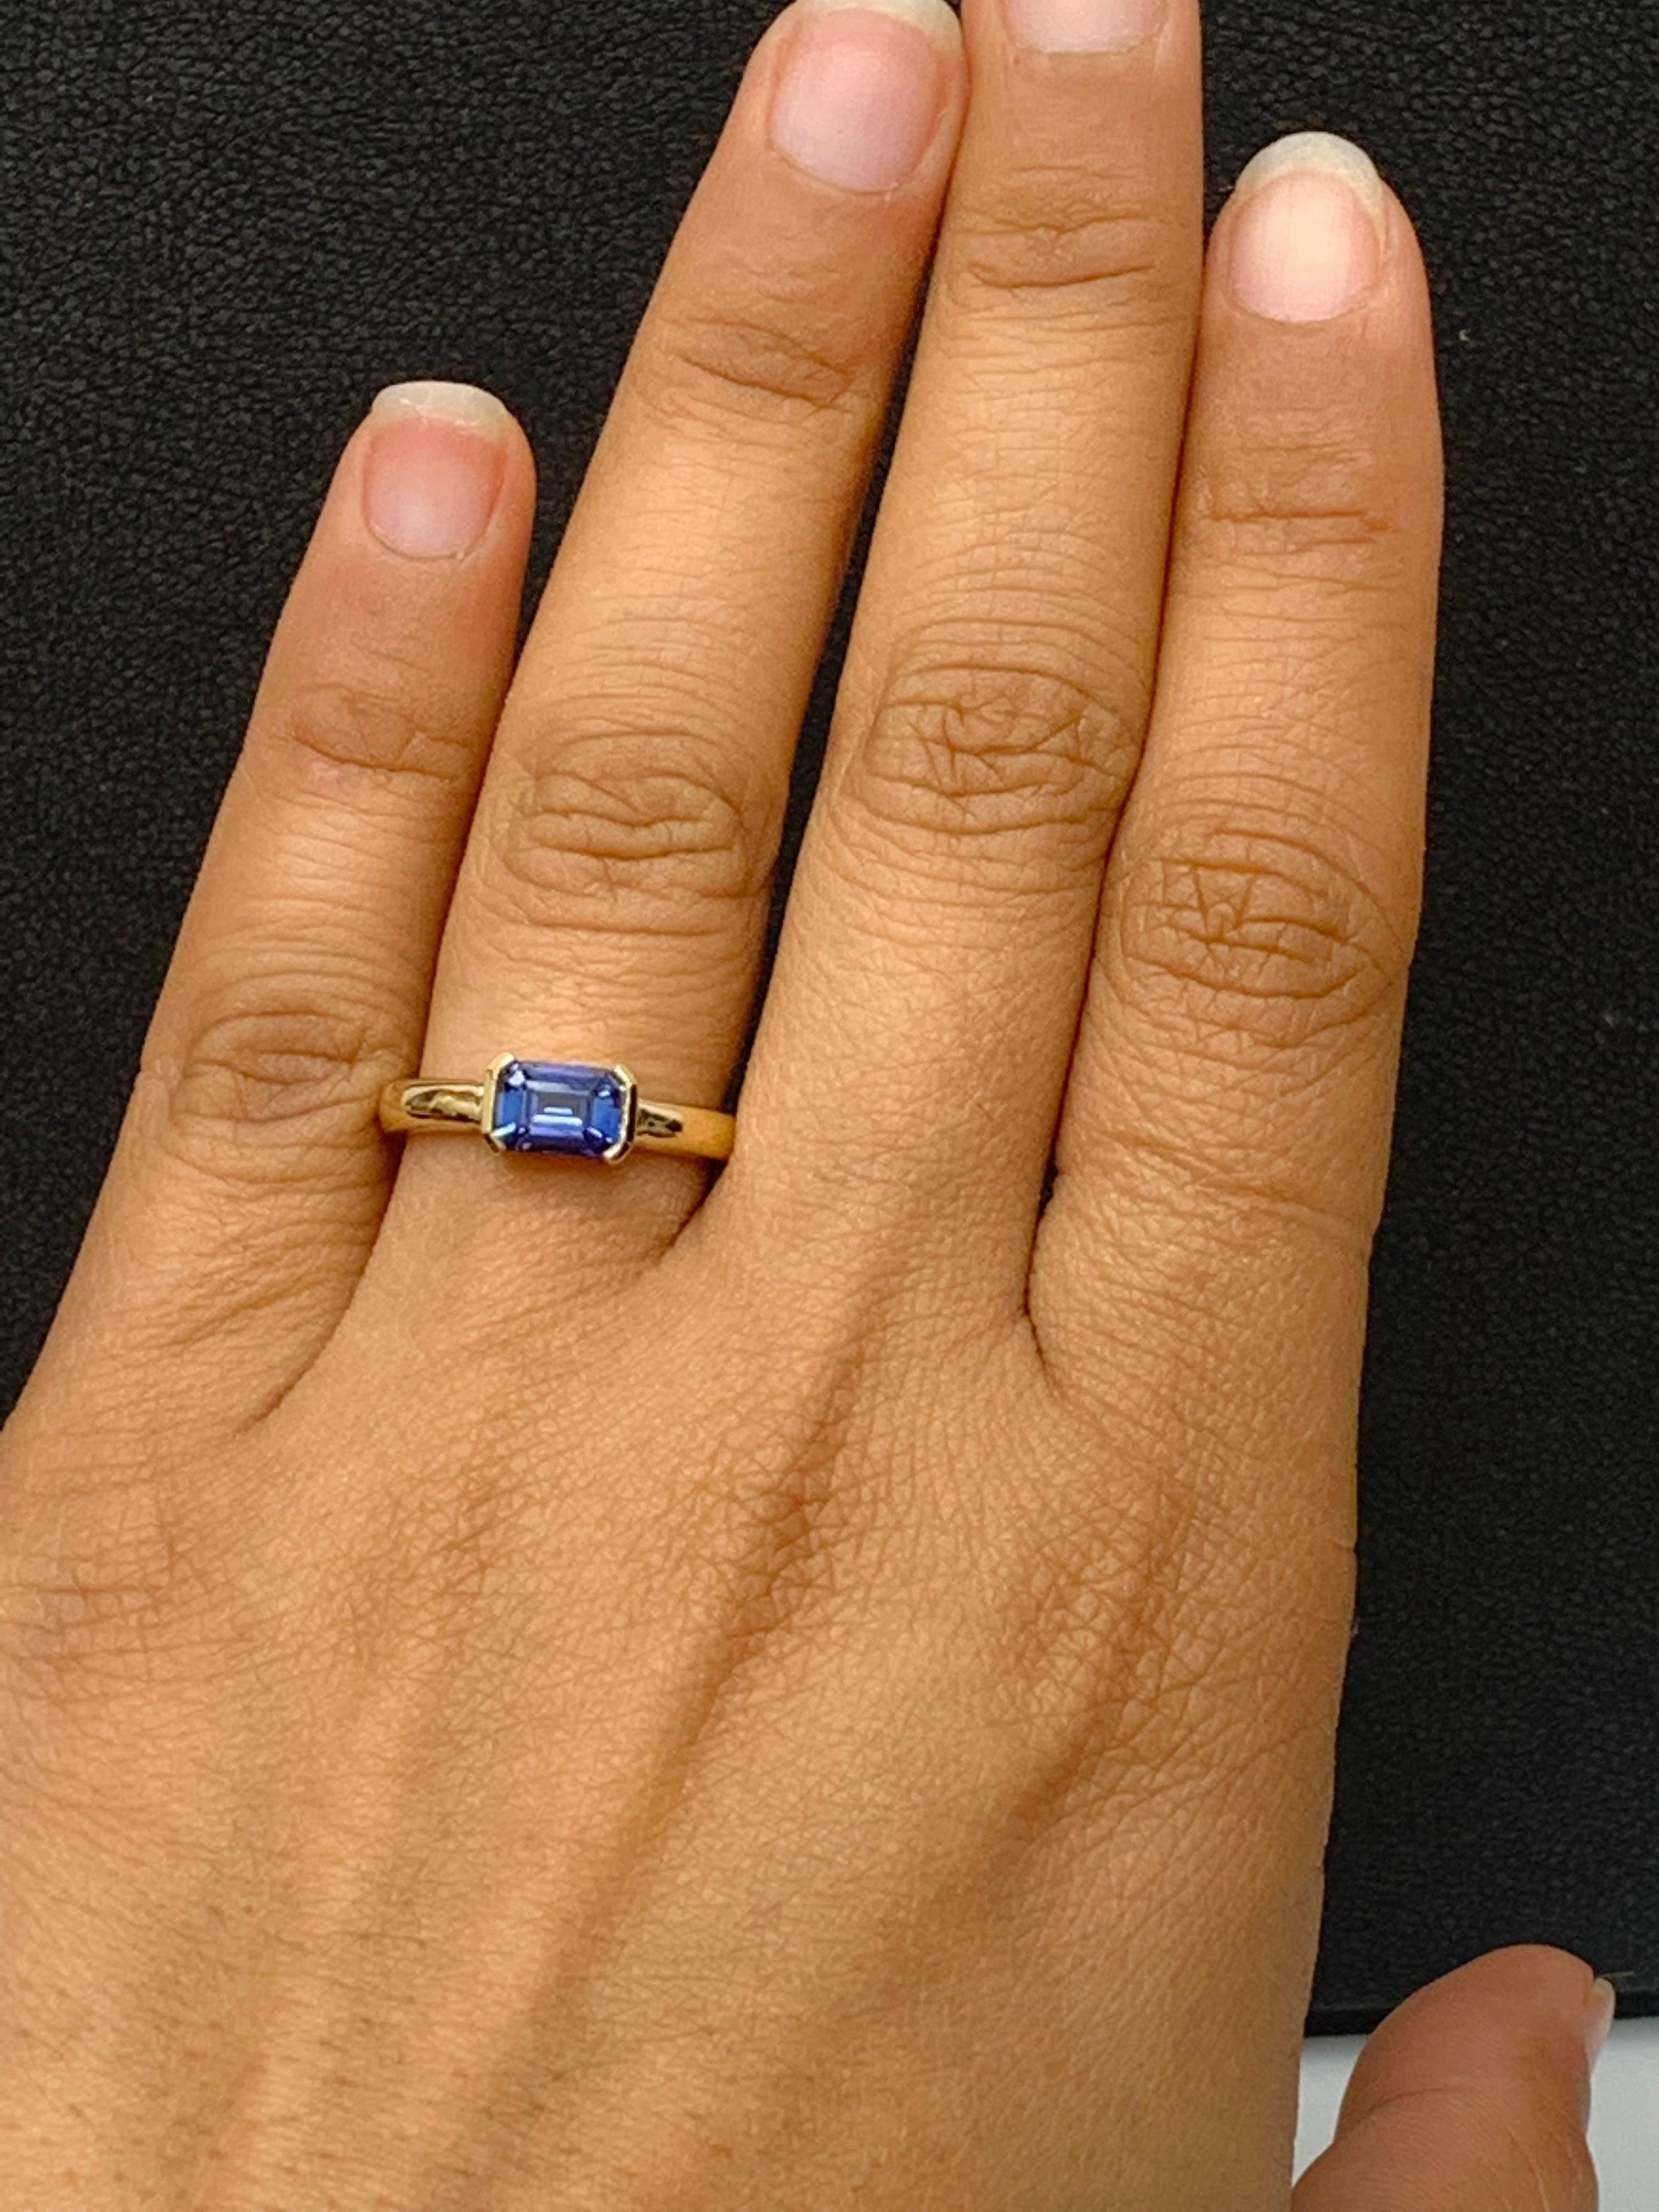 1.06 Carat Emerald Cut Blue Sapphire Band Ring in 14K Yellow Gold For Sale 3